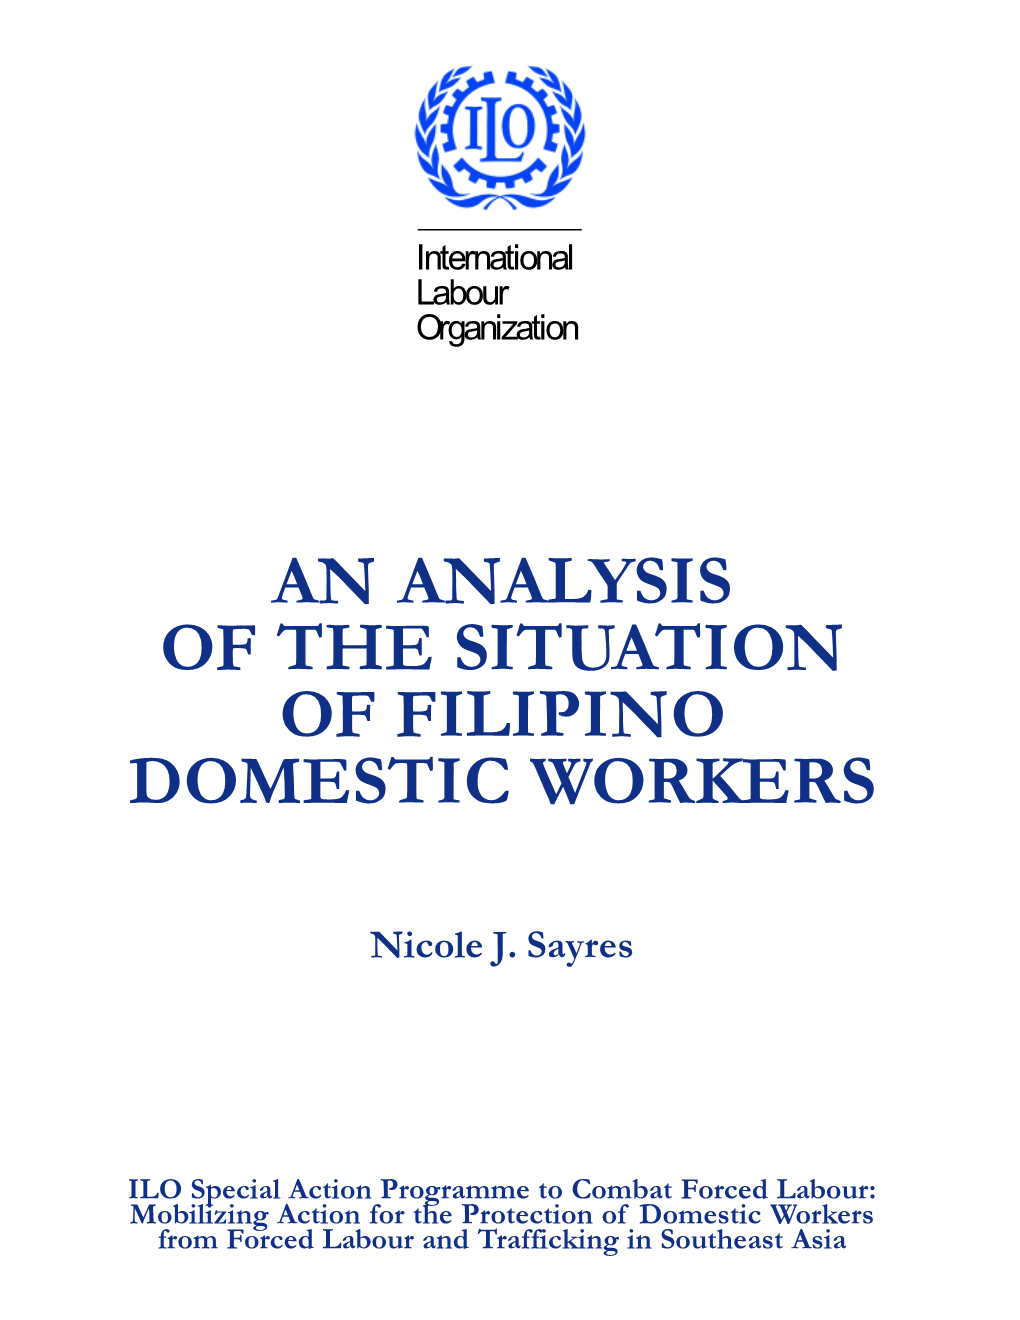 An Analysis of the Situation of Filipino Domestic Workers